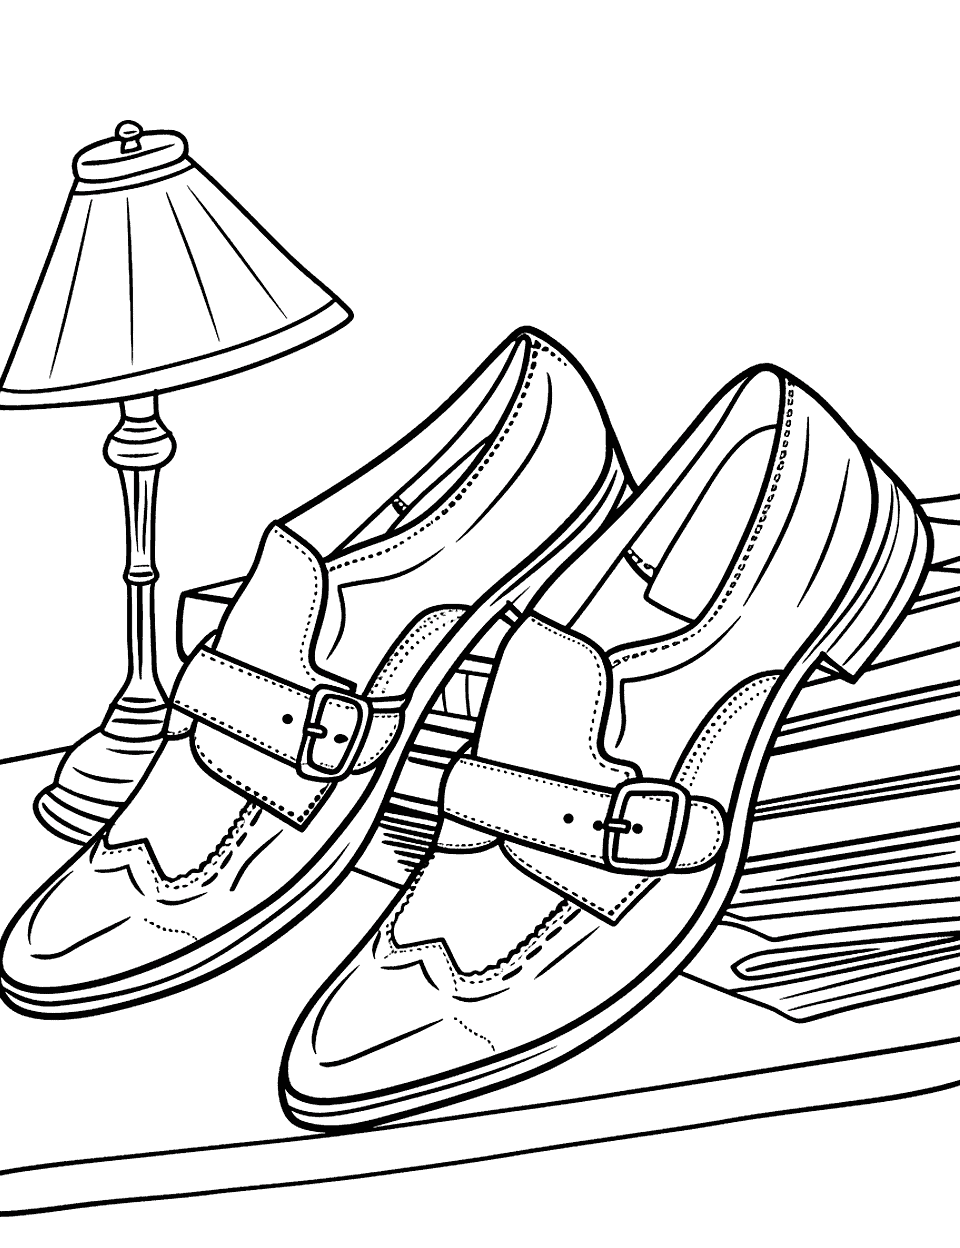 Strap Shoes at a Library Shoe Coloring Page - Elegant strap shoes next to a stack of books and a reading lamp on a wooden table.